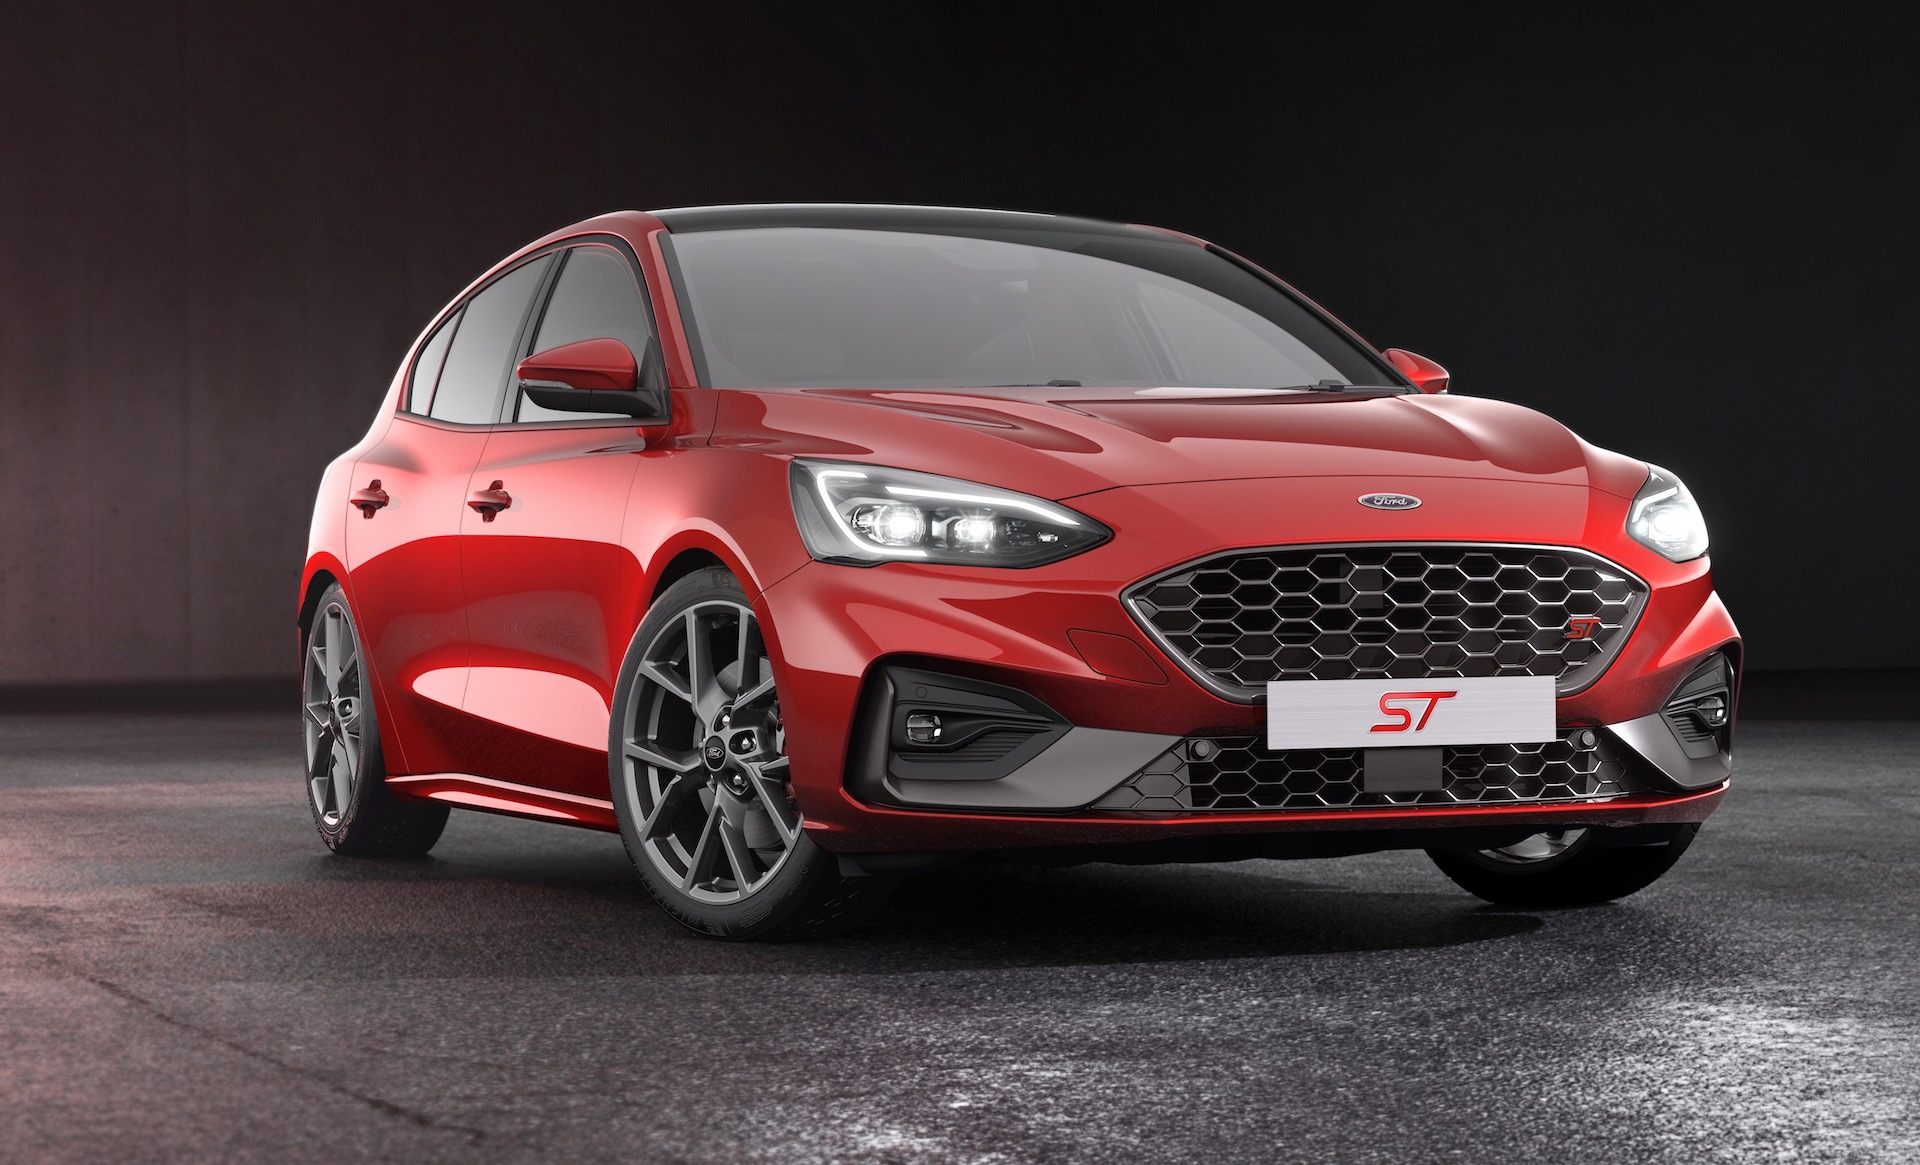 2021 Ford Focus St 3 Special Edition Announced For Australia